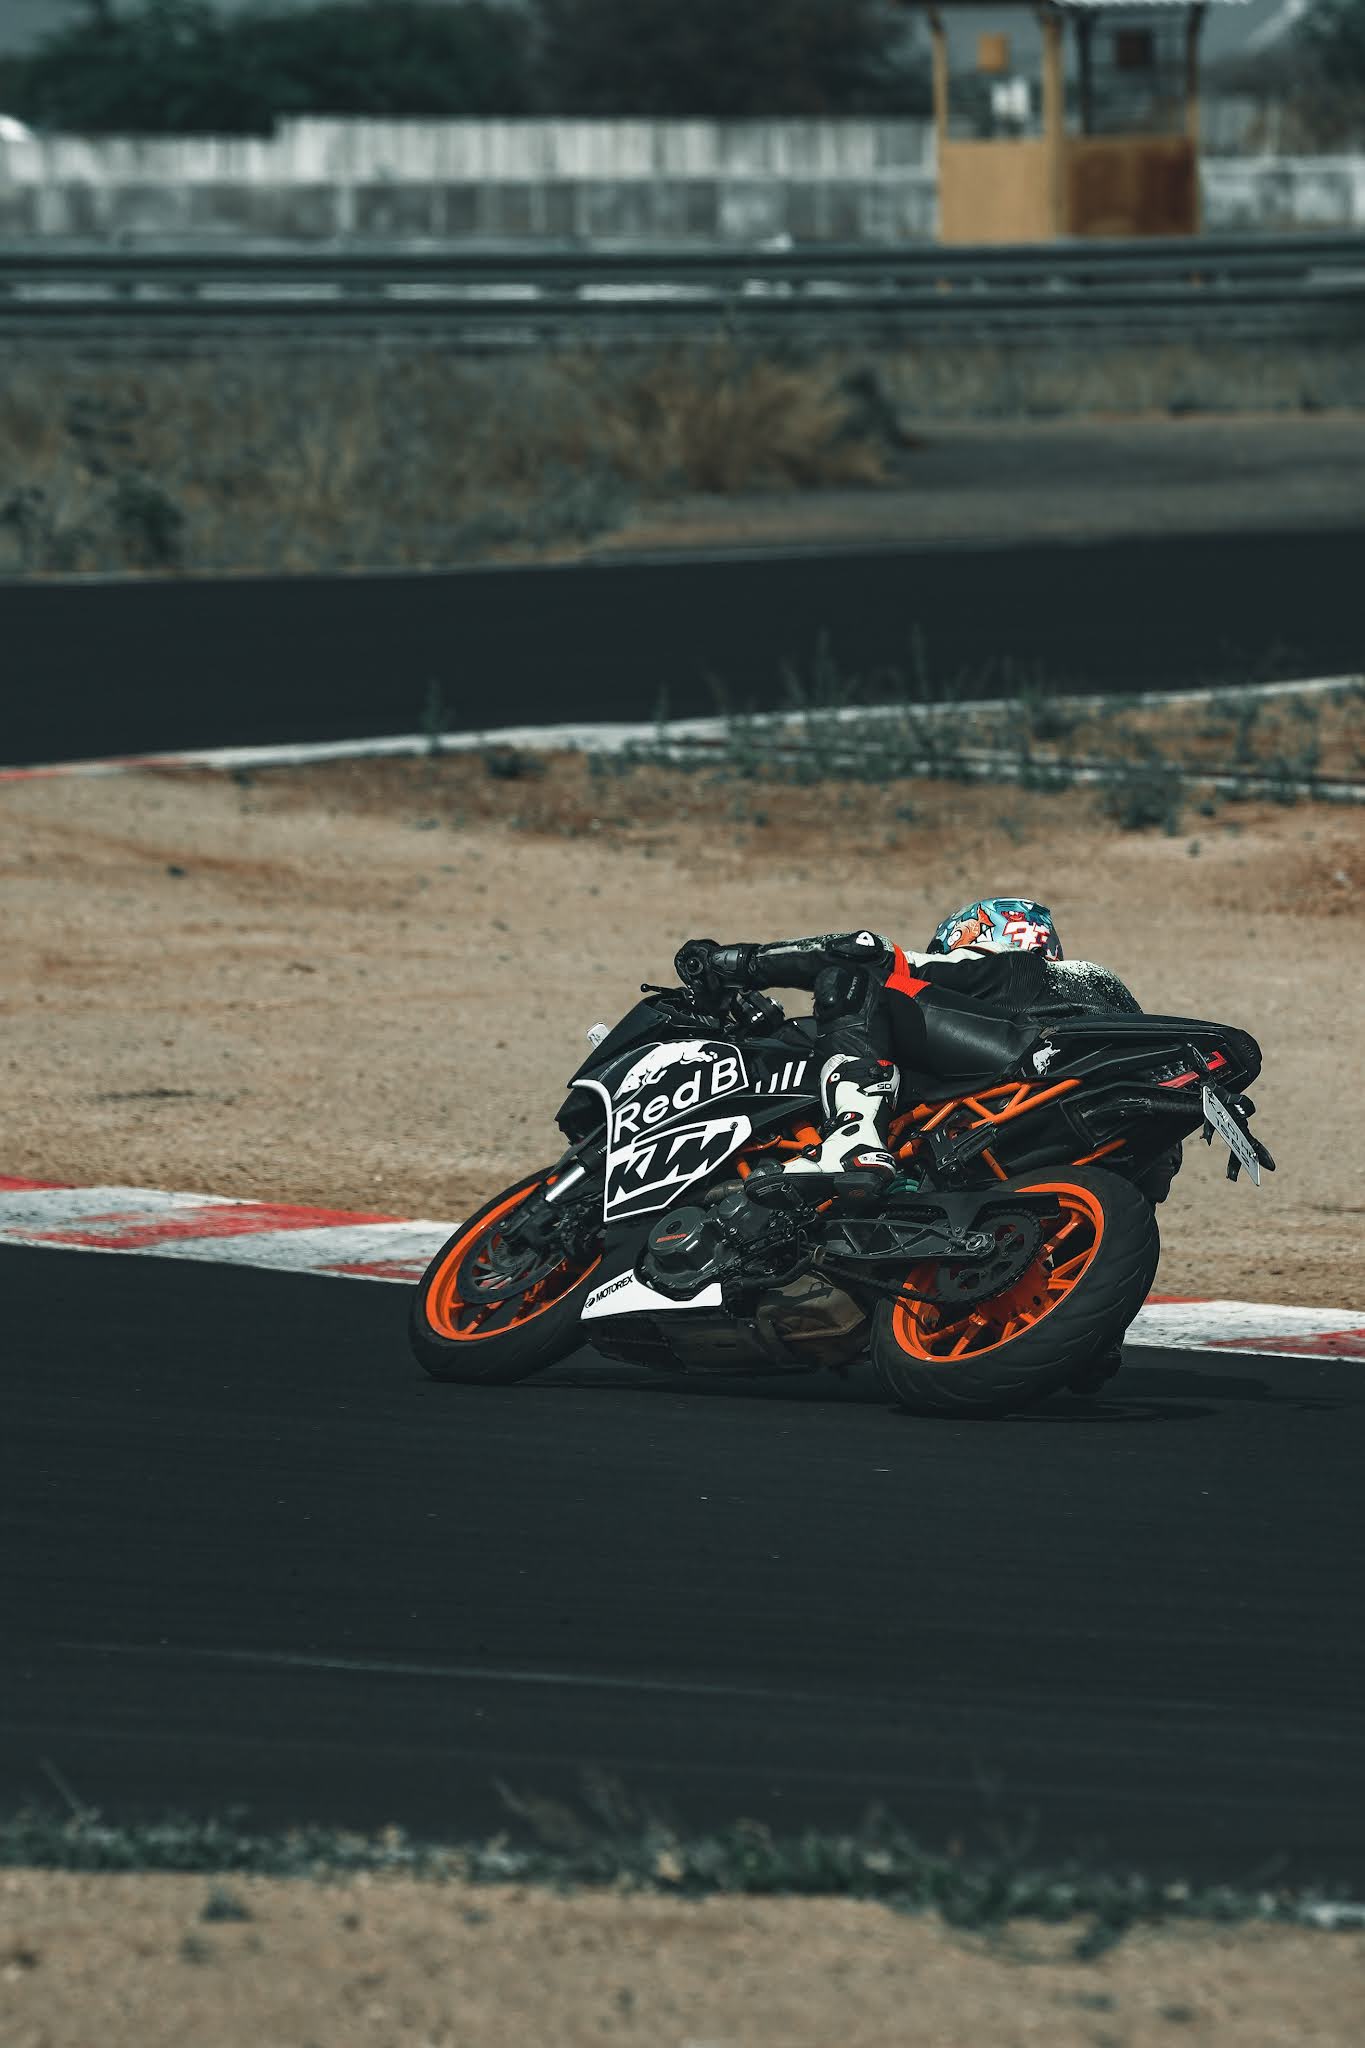 KTM RC 390 Price, Mileage, Specifications, Colors, Top Speed and Services